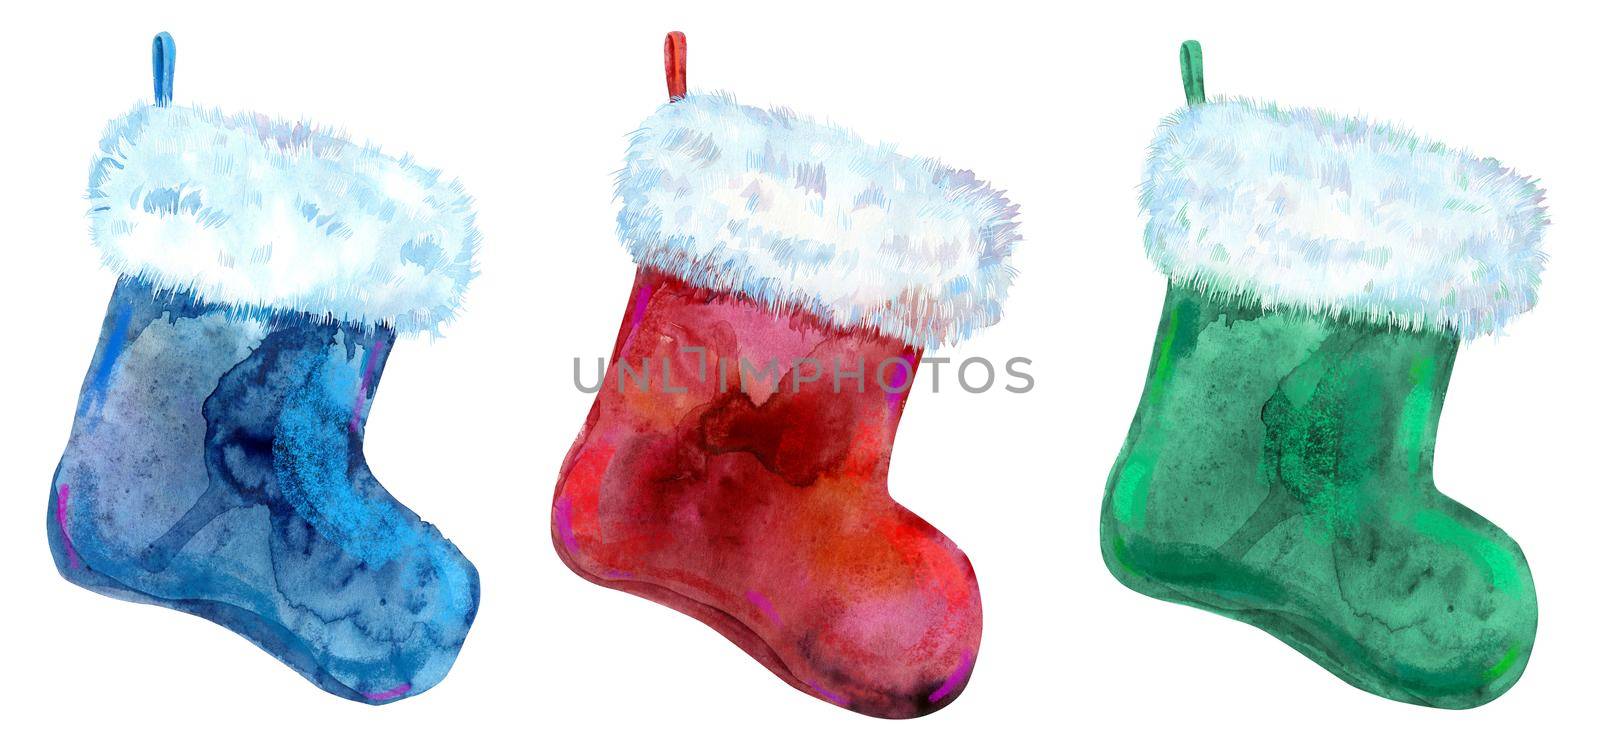 Christmas colorfull socks with white fur. Watercolor illustration. Isolated. by NataOmsk